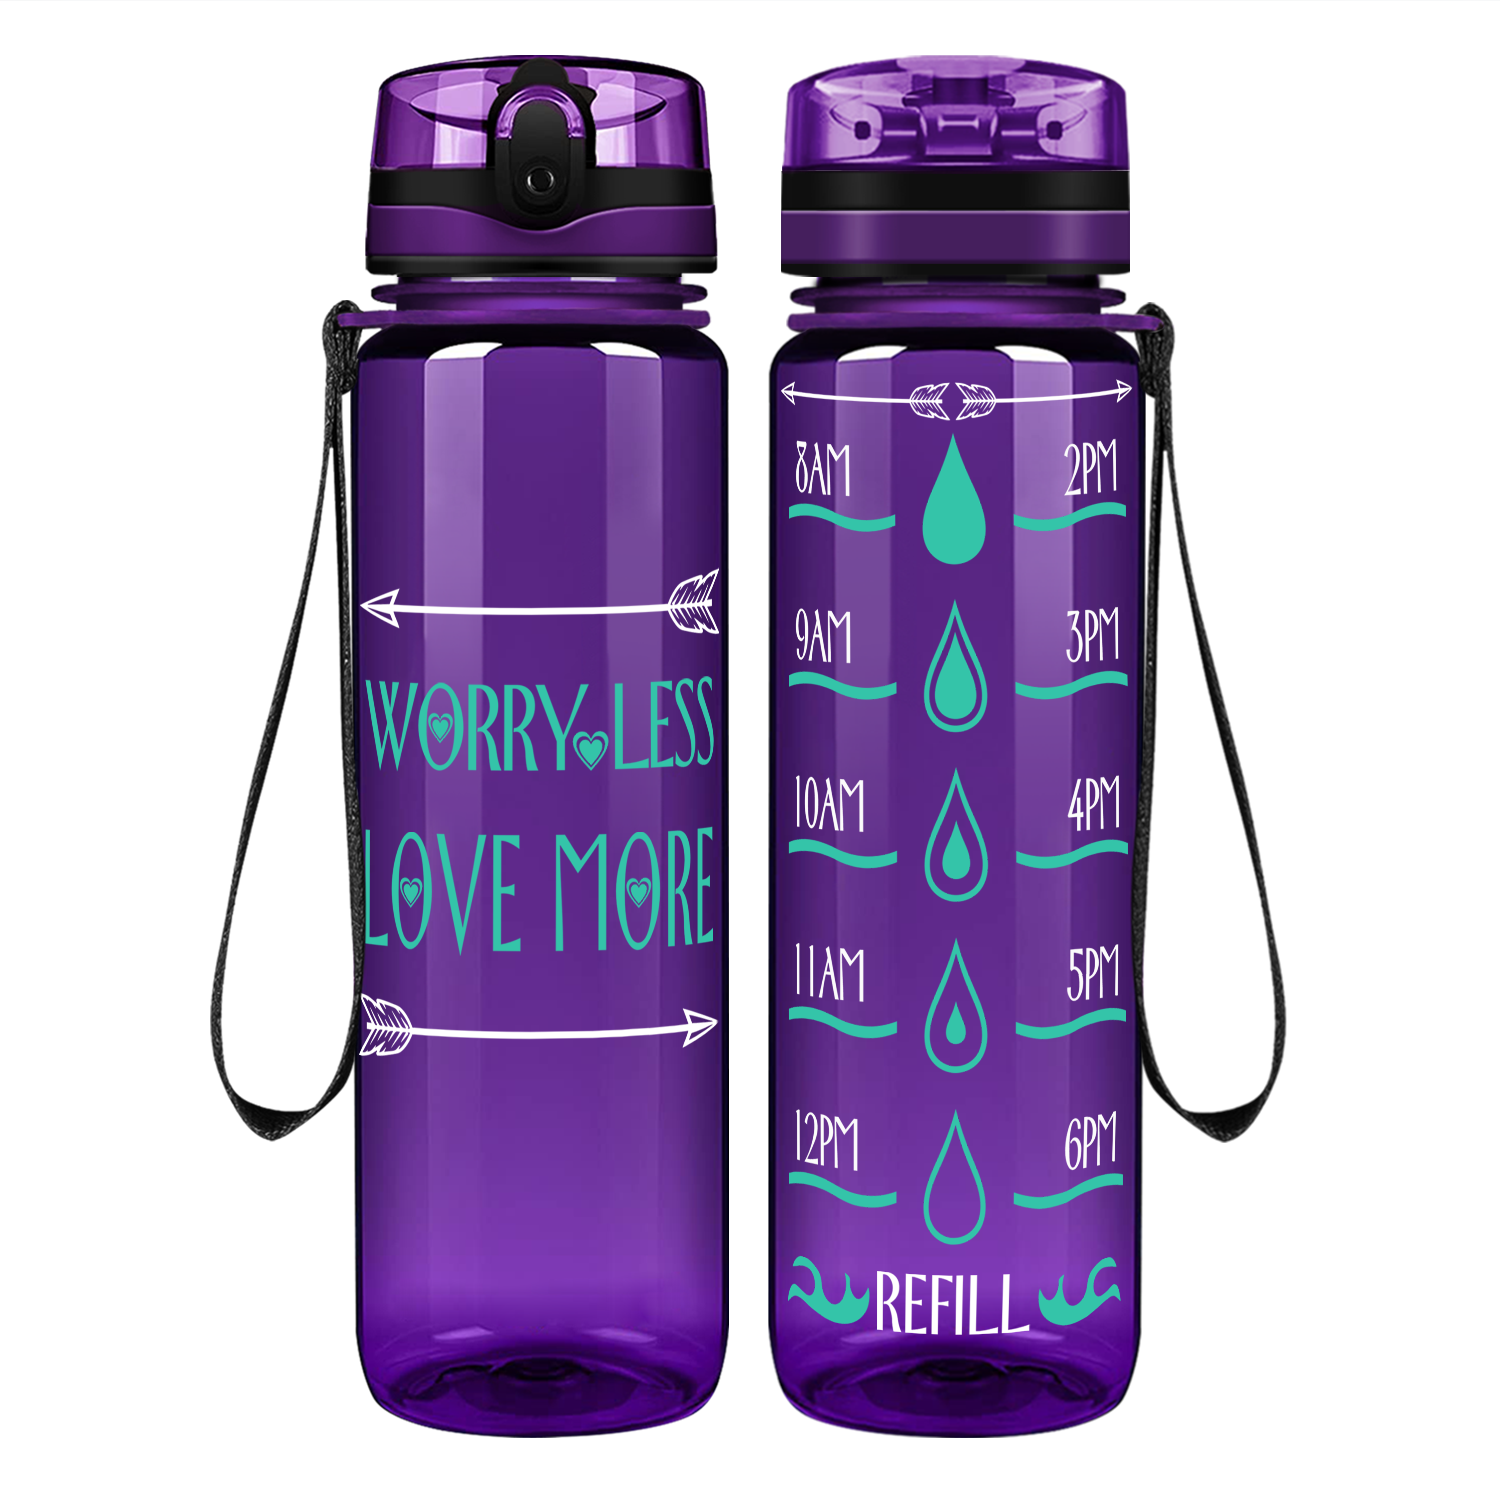 Love More Arrows on 32 oz Motivational Tracking Water Bottle